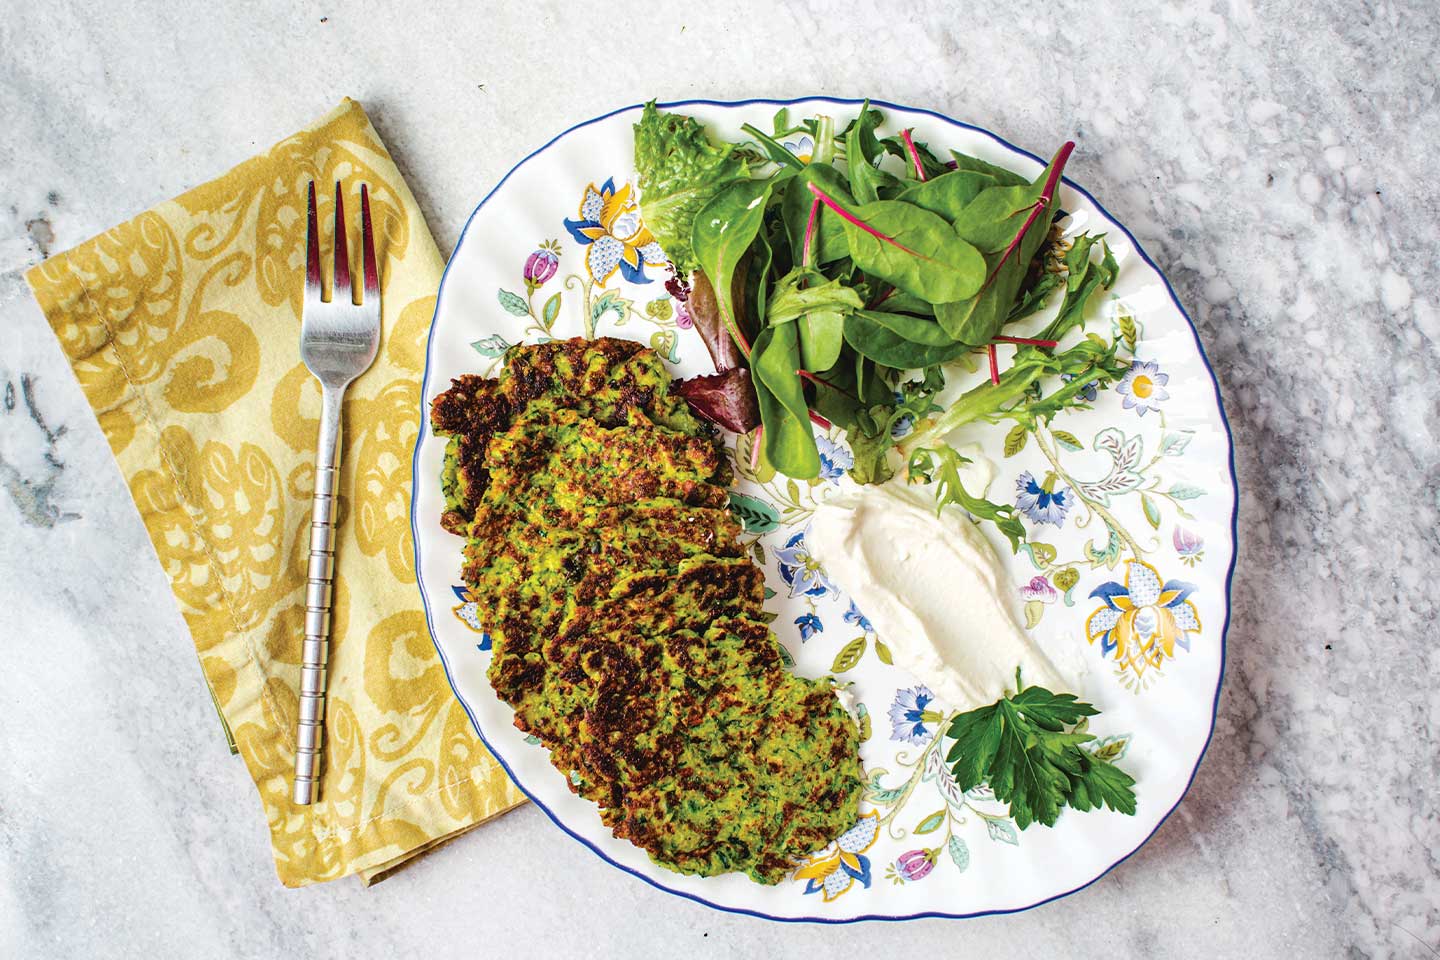 Hannah Wright’s Summertime Zucchini Fritters recipe in chattanooga